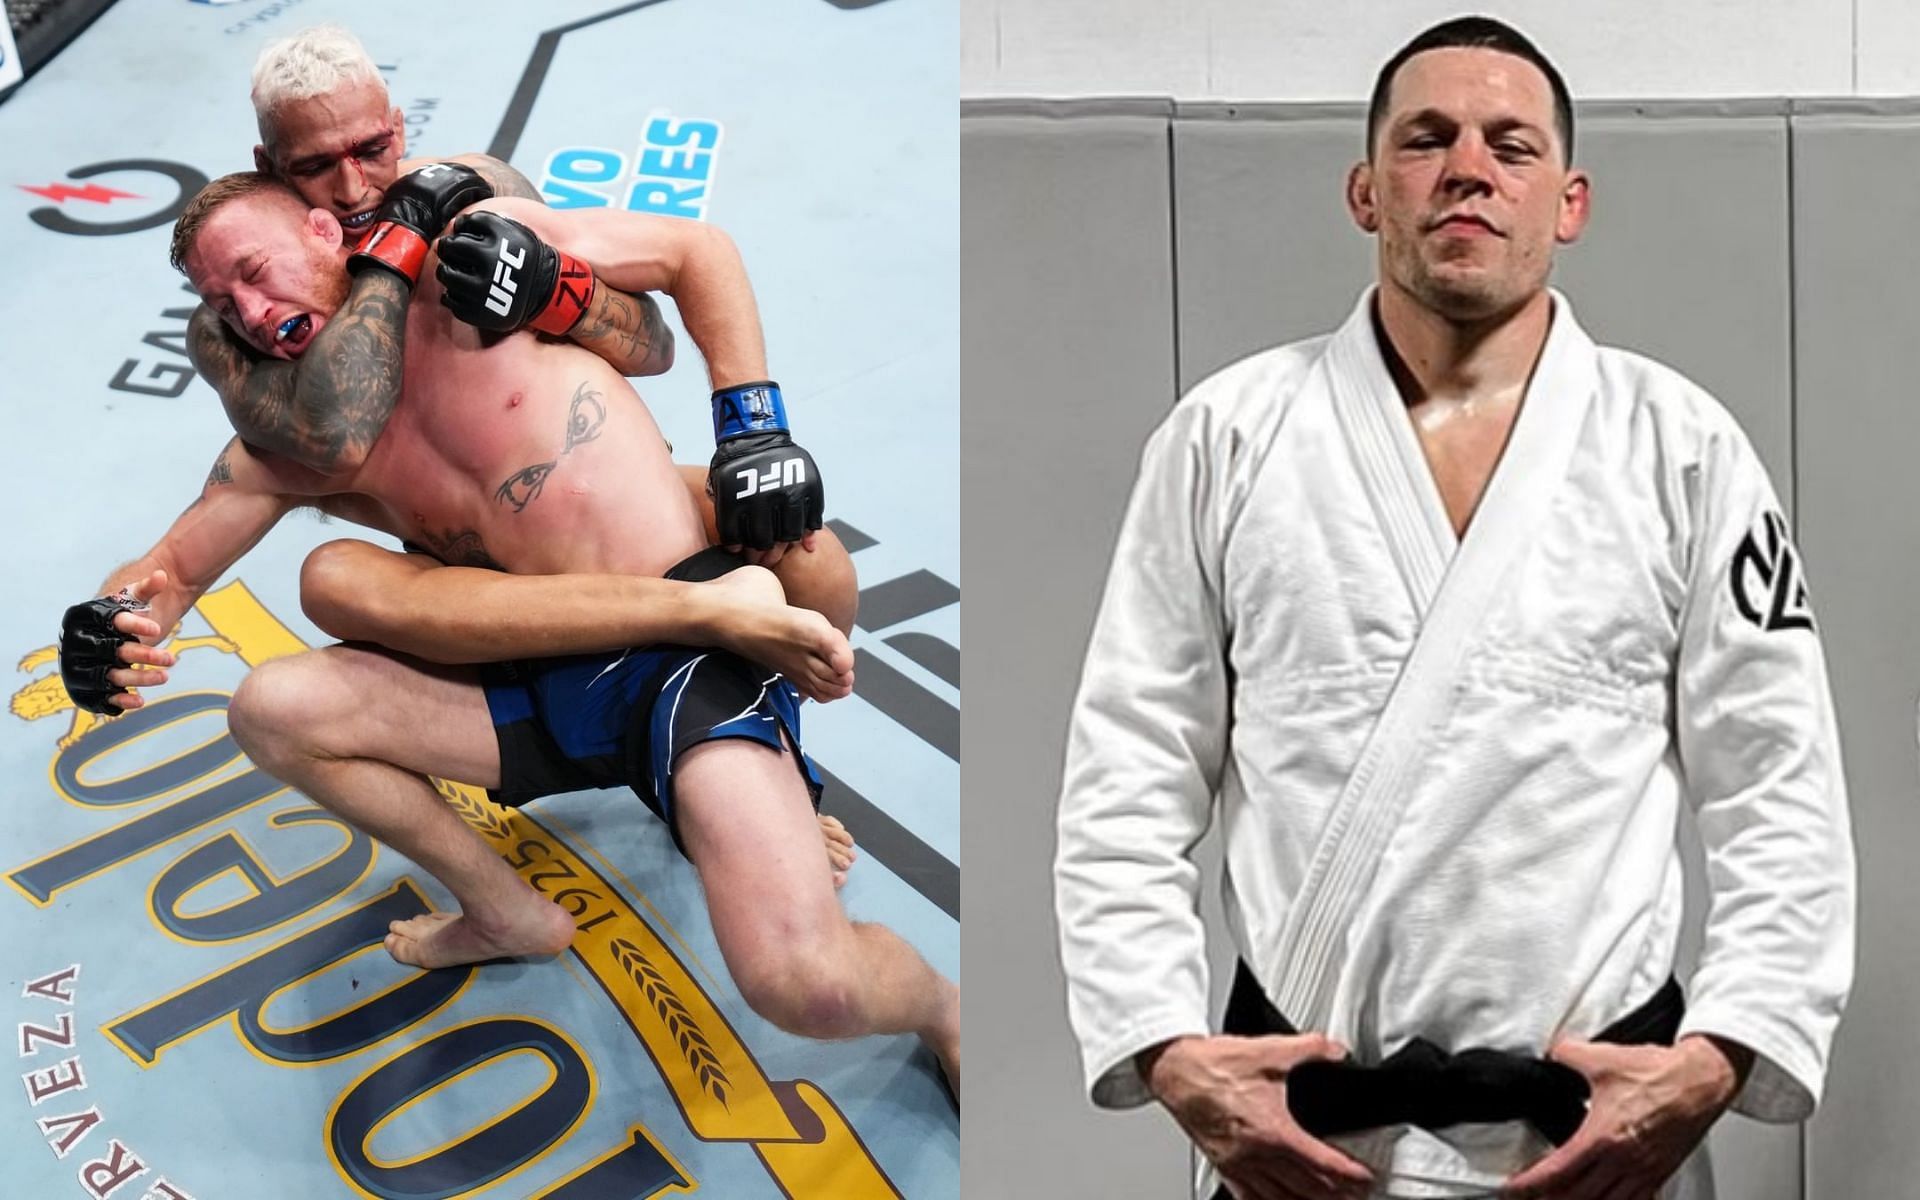 Nate Diaz claims he would choke out Charles Oliveira “easy”